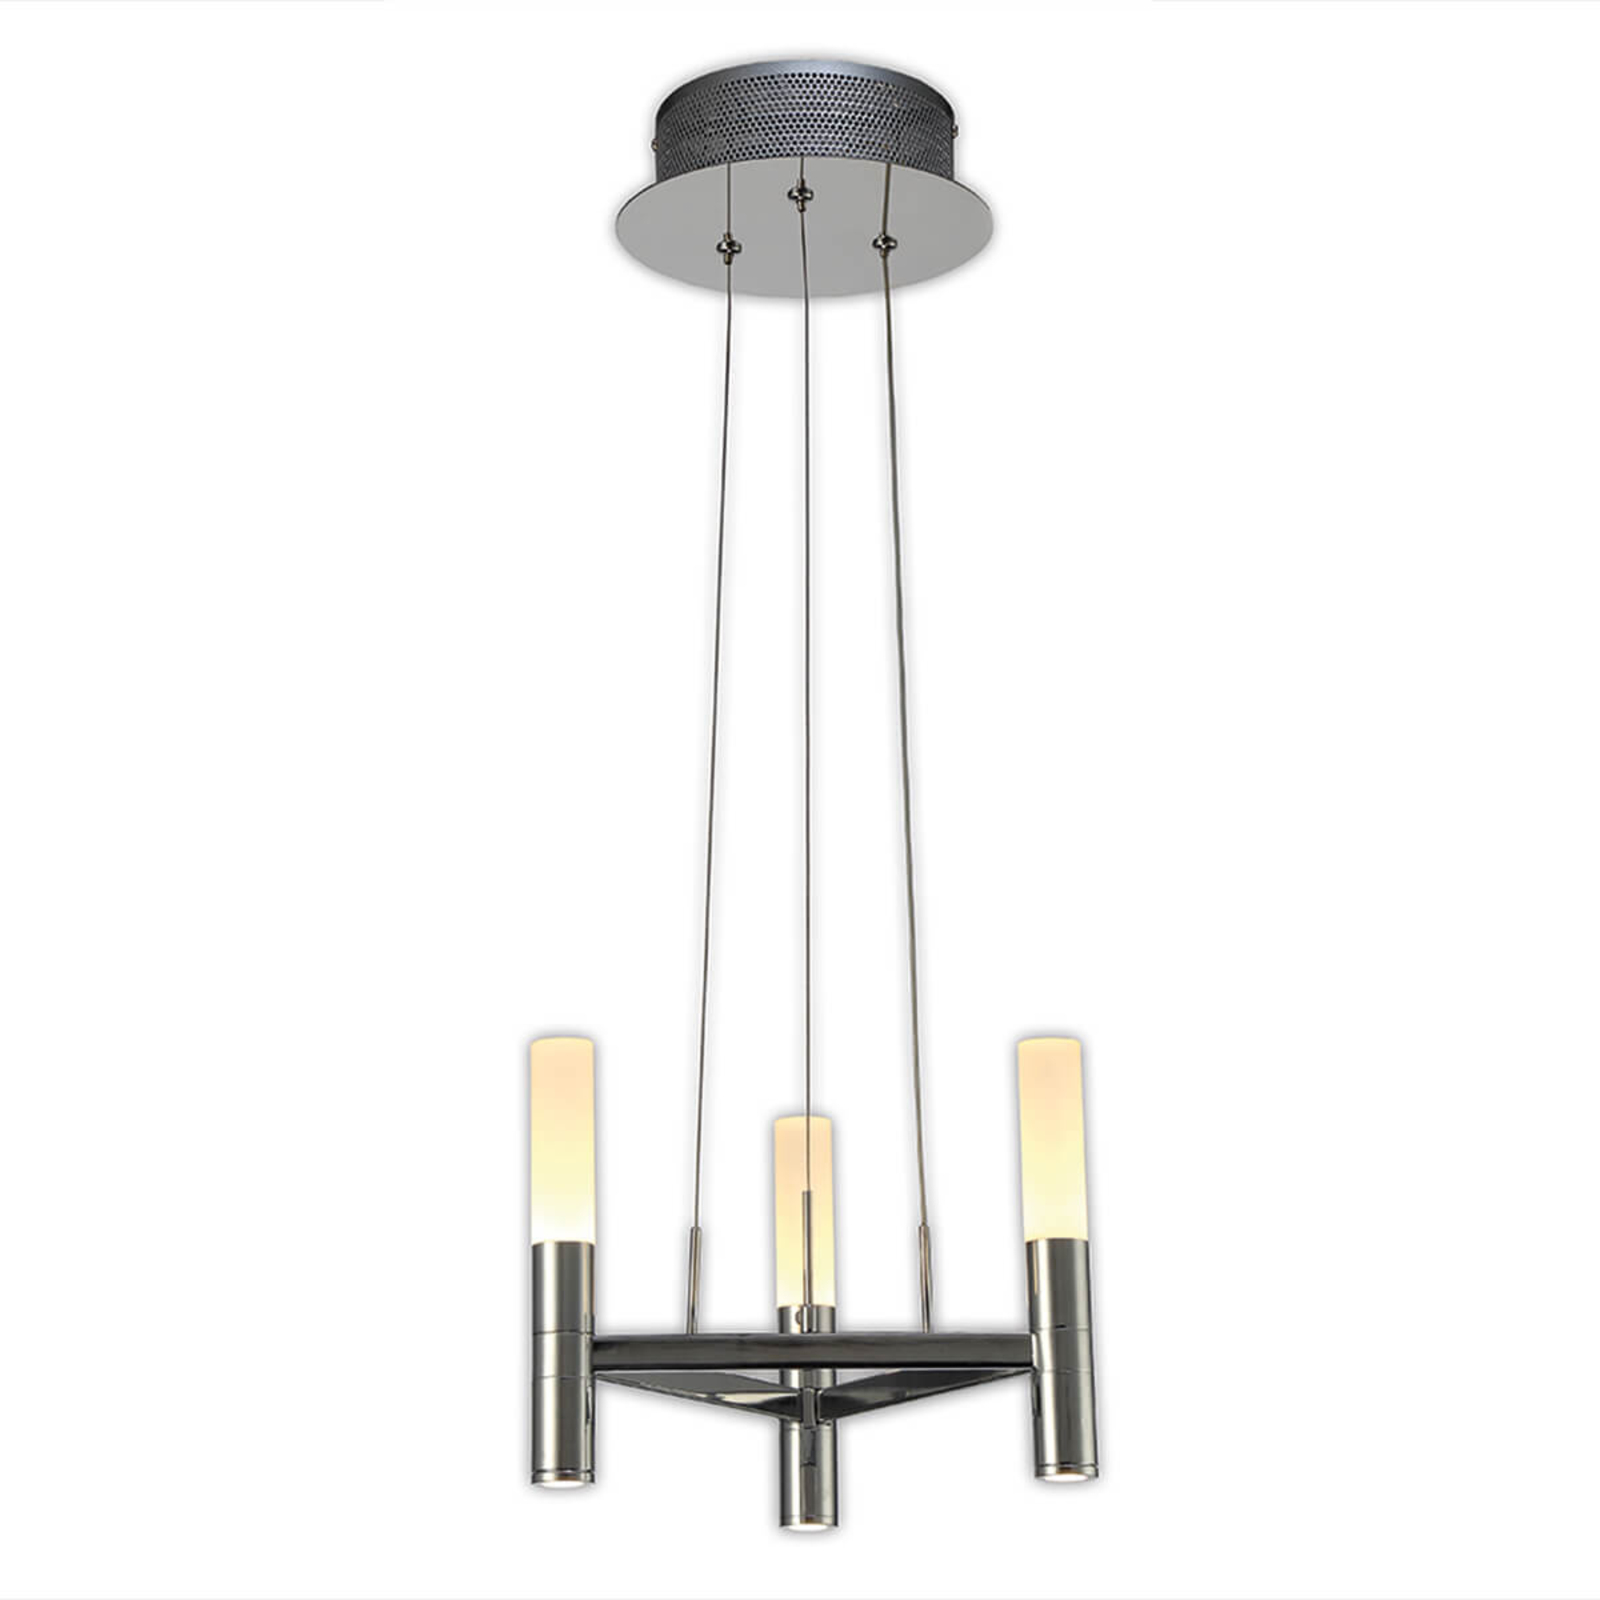 Suspension LED Irina dimmable à 3 lampes